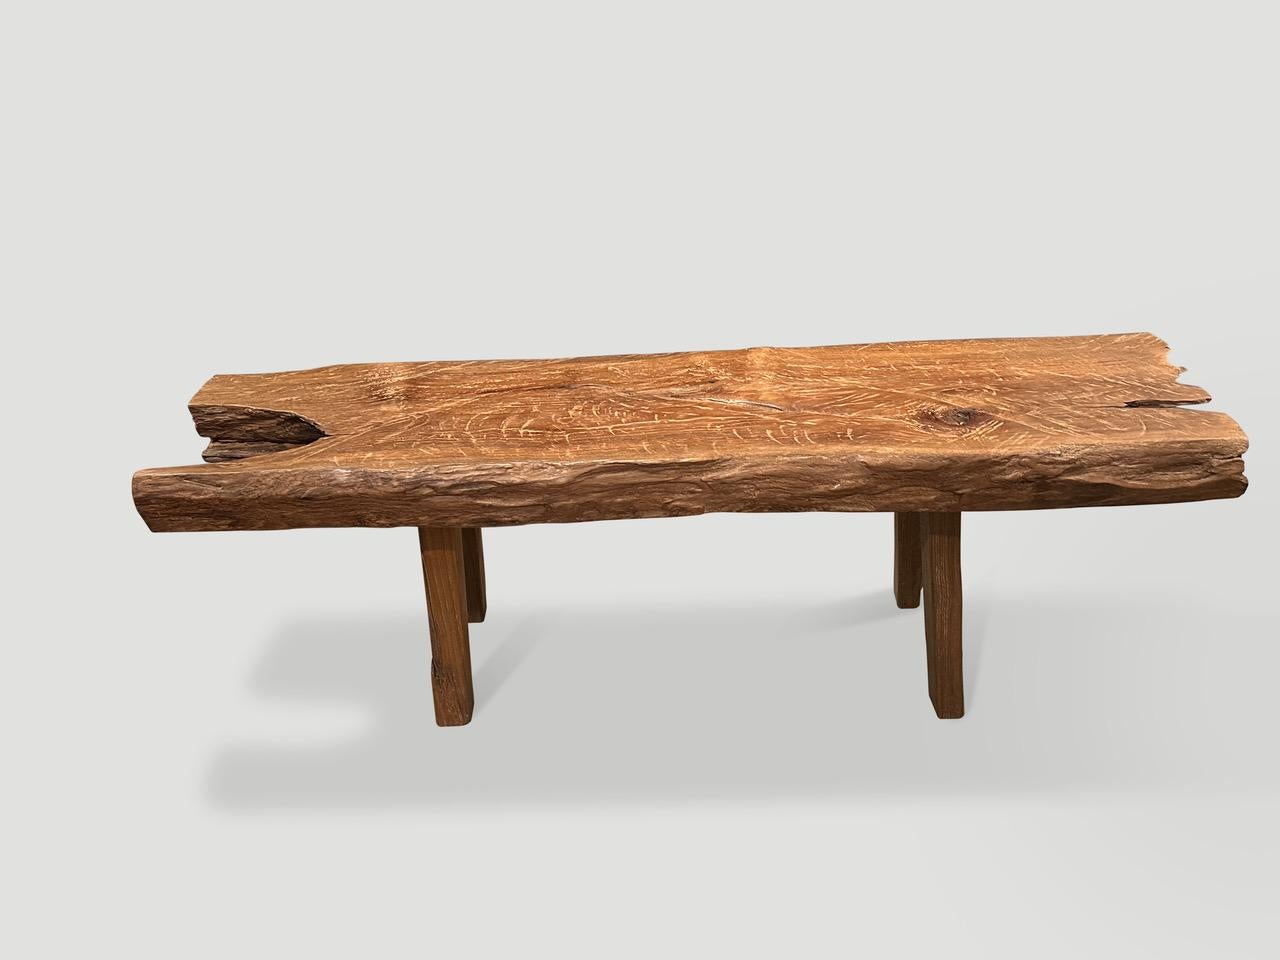 Impressive antique bench with beautiful character and patina. Hand made from a thick three inch teak log. Both sculptural and usable. Circa 1950.

This bench was hand made in the spirit of Wabi-Sabi, a Japanese philosophy that beauty can be found in